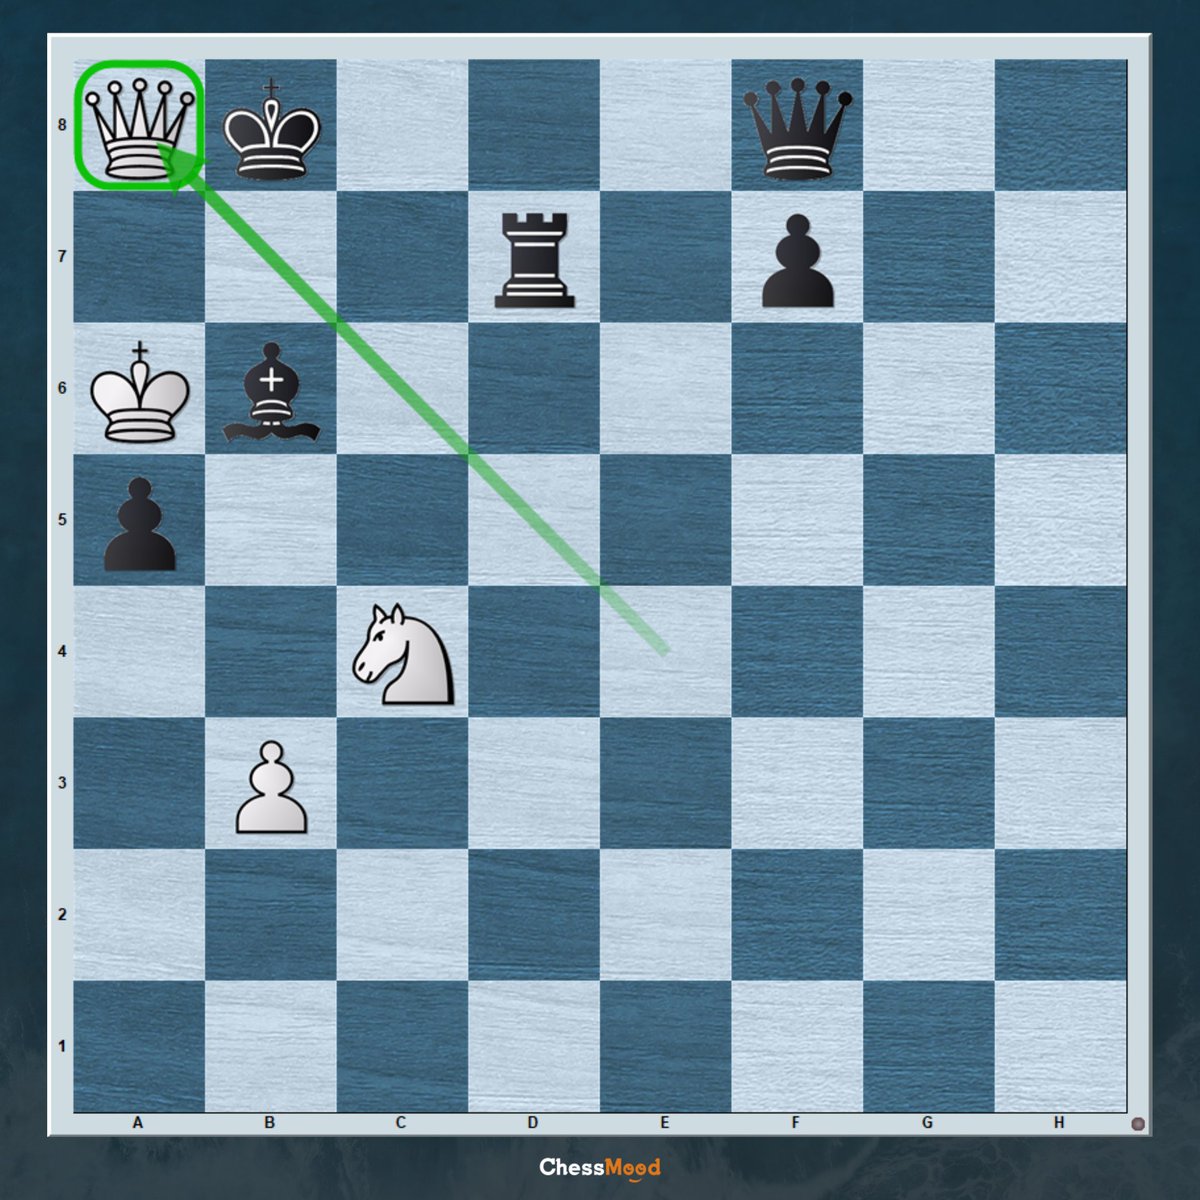 You have only 1 word to describe this move.
#chesspunks #chess